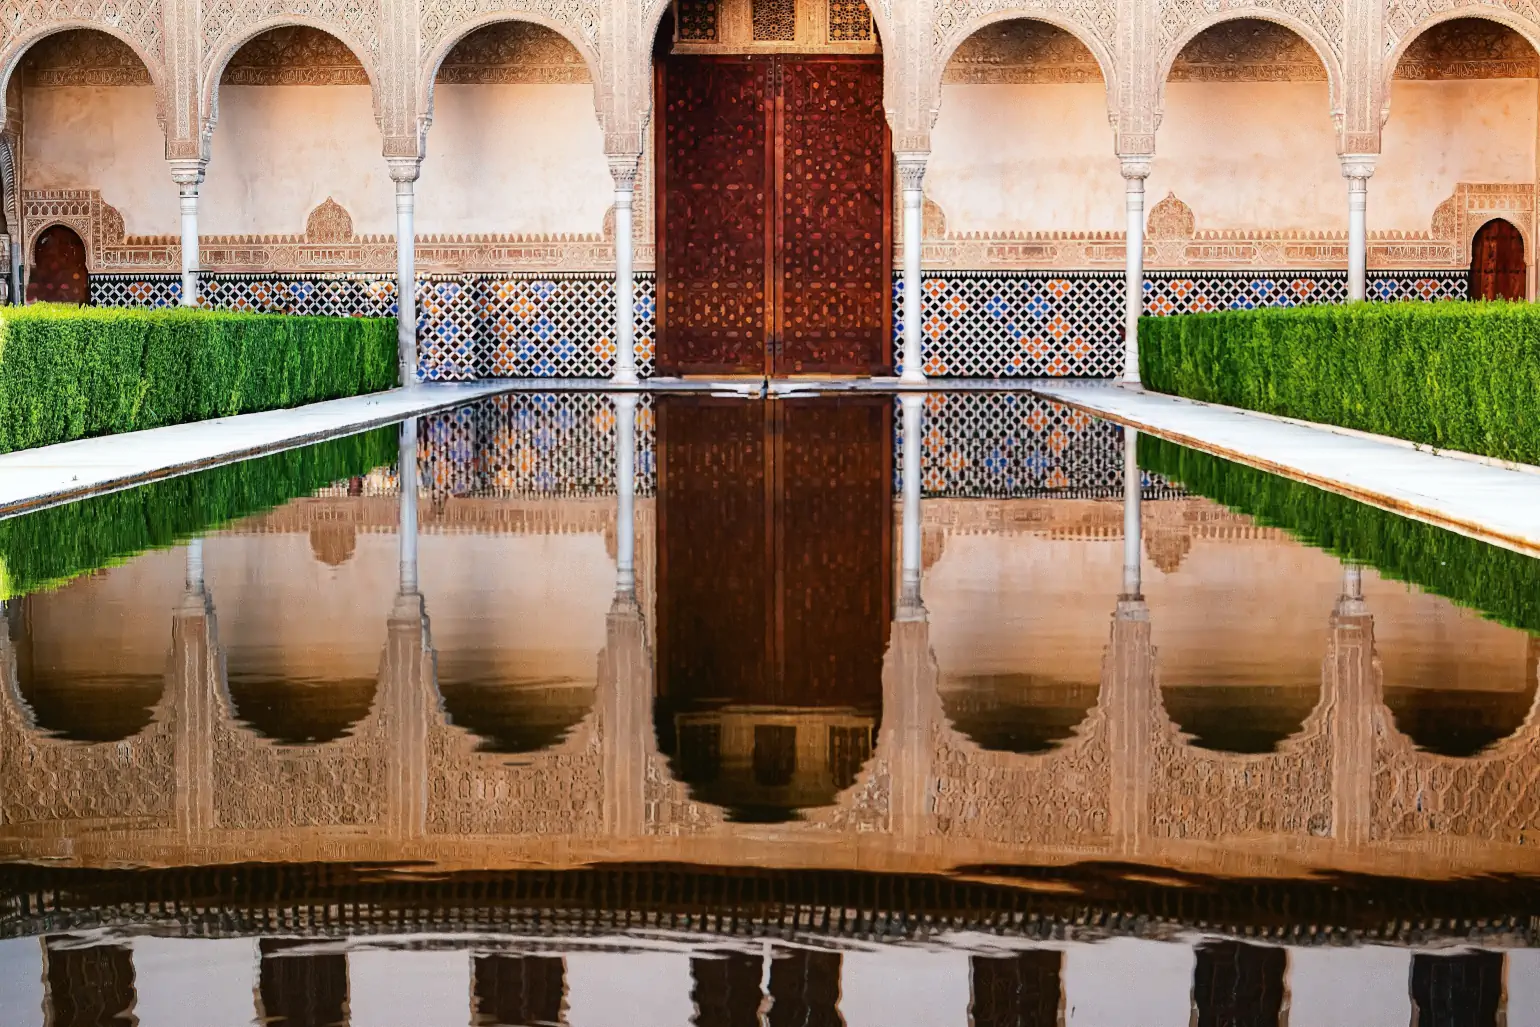 The door of Alhambra Palace, Spain. A still pool reflects grand doors, flanked on each side by arches and hedges.